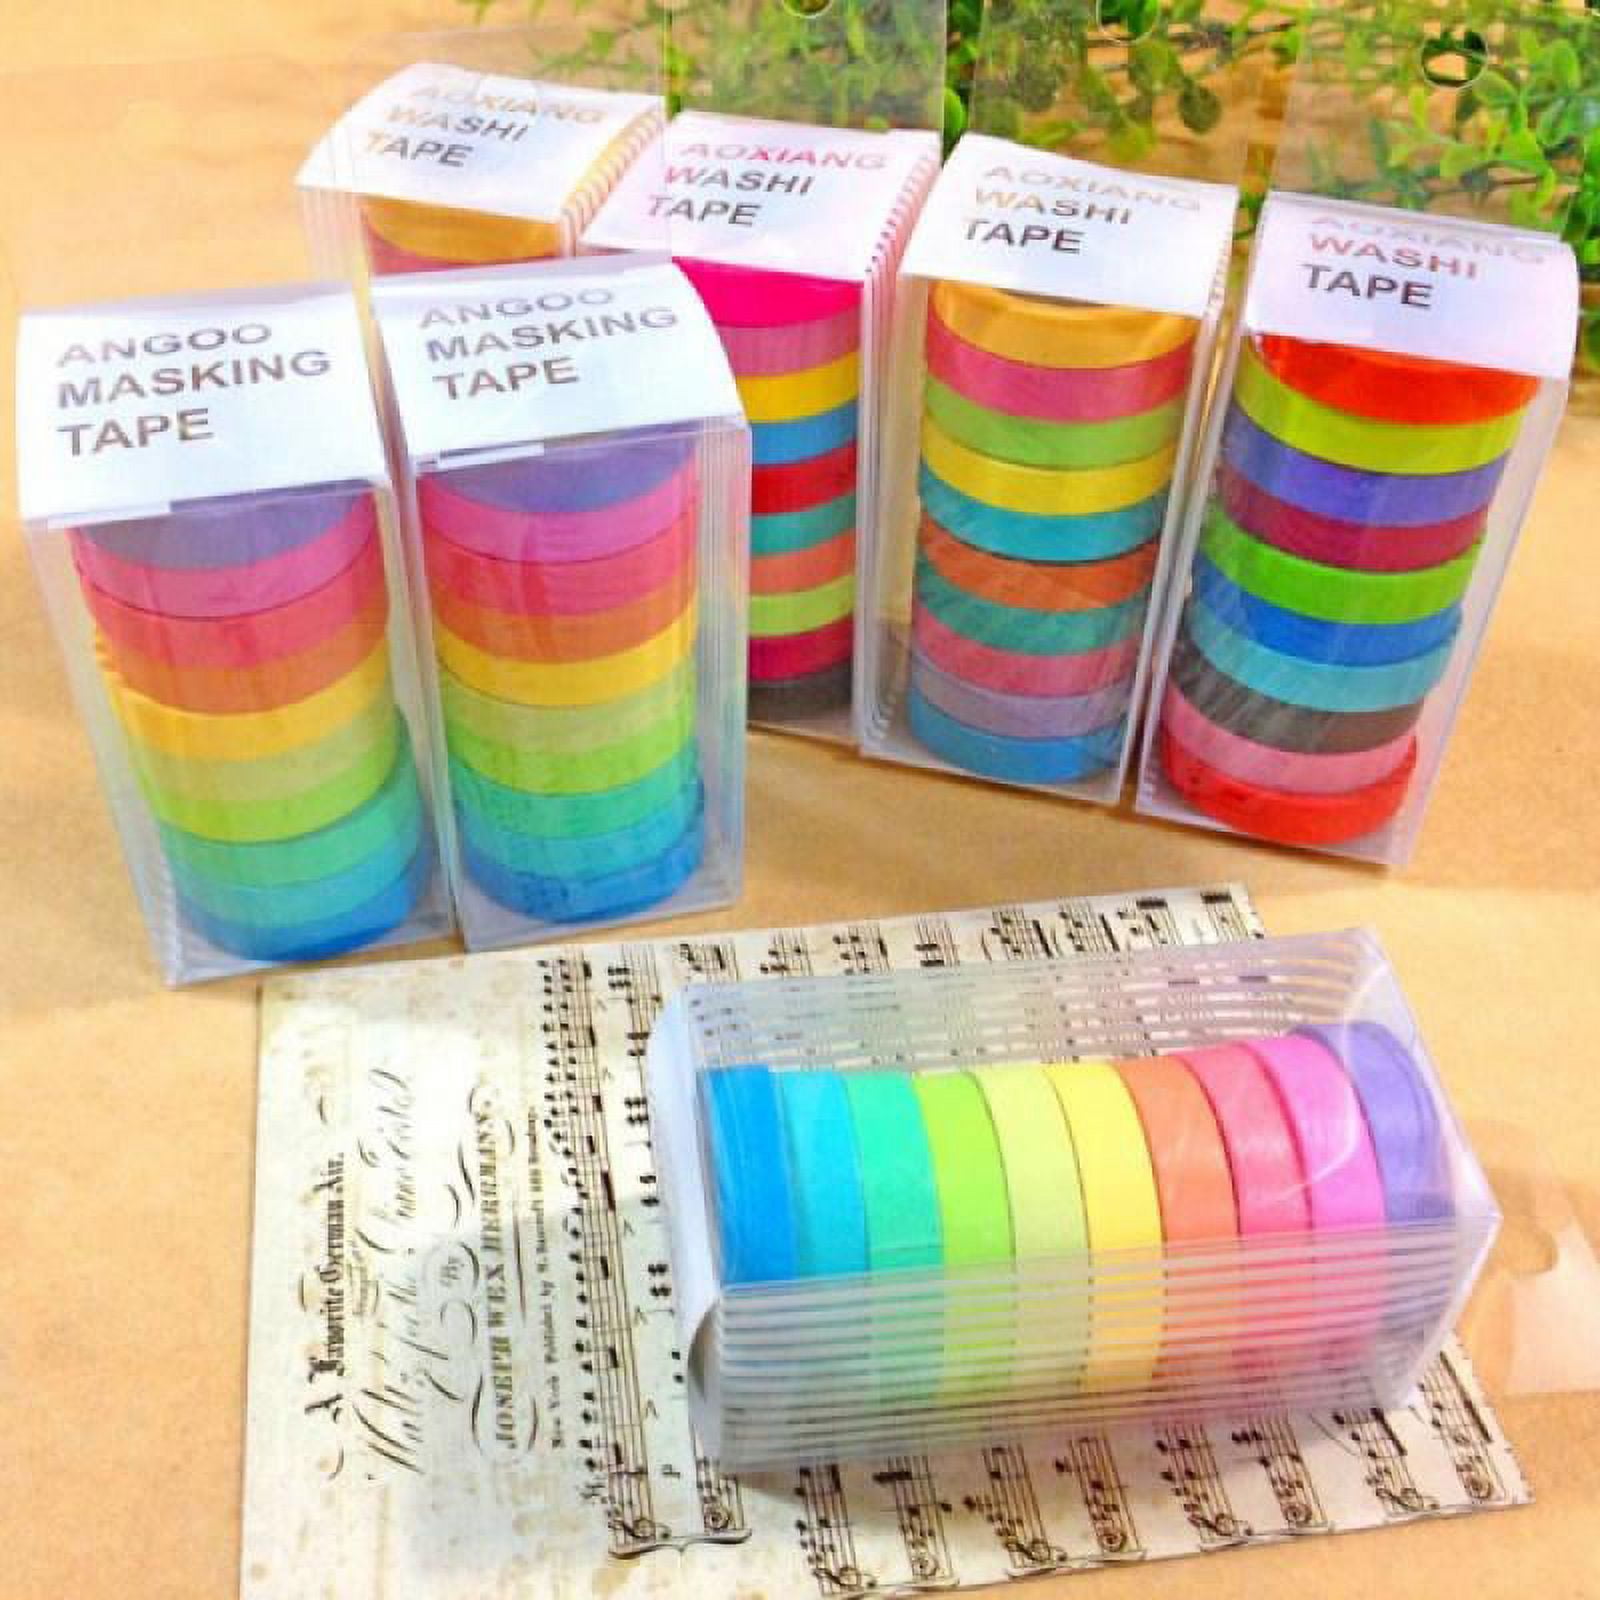  Assorted Color Tape for Crafting, 1 inch by 60 Yards, 5 Rolls,  Colorful Masking and Washi Style Adhesive, Arts, Crafts, DIY Projects,  Labeling, Moving, Sticks to Cloth, Paper or Metal